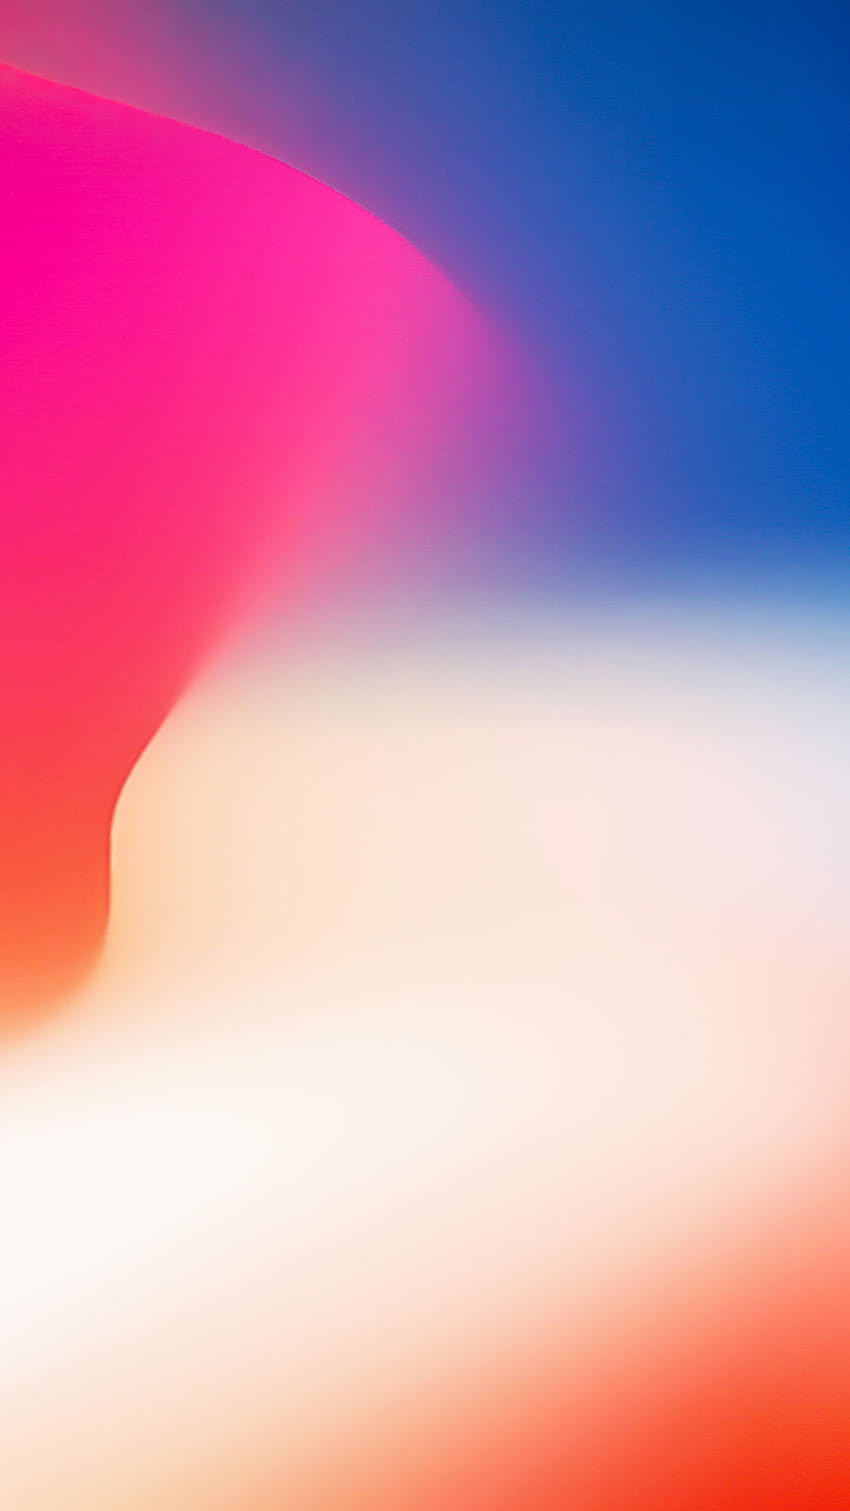 Iphone X posted by Ryan Johnson, iphone x official HD phone wallpaper